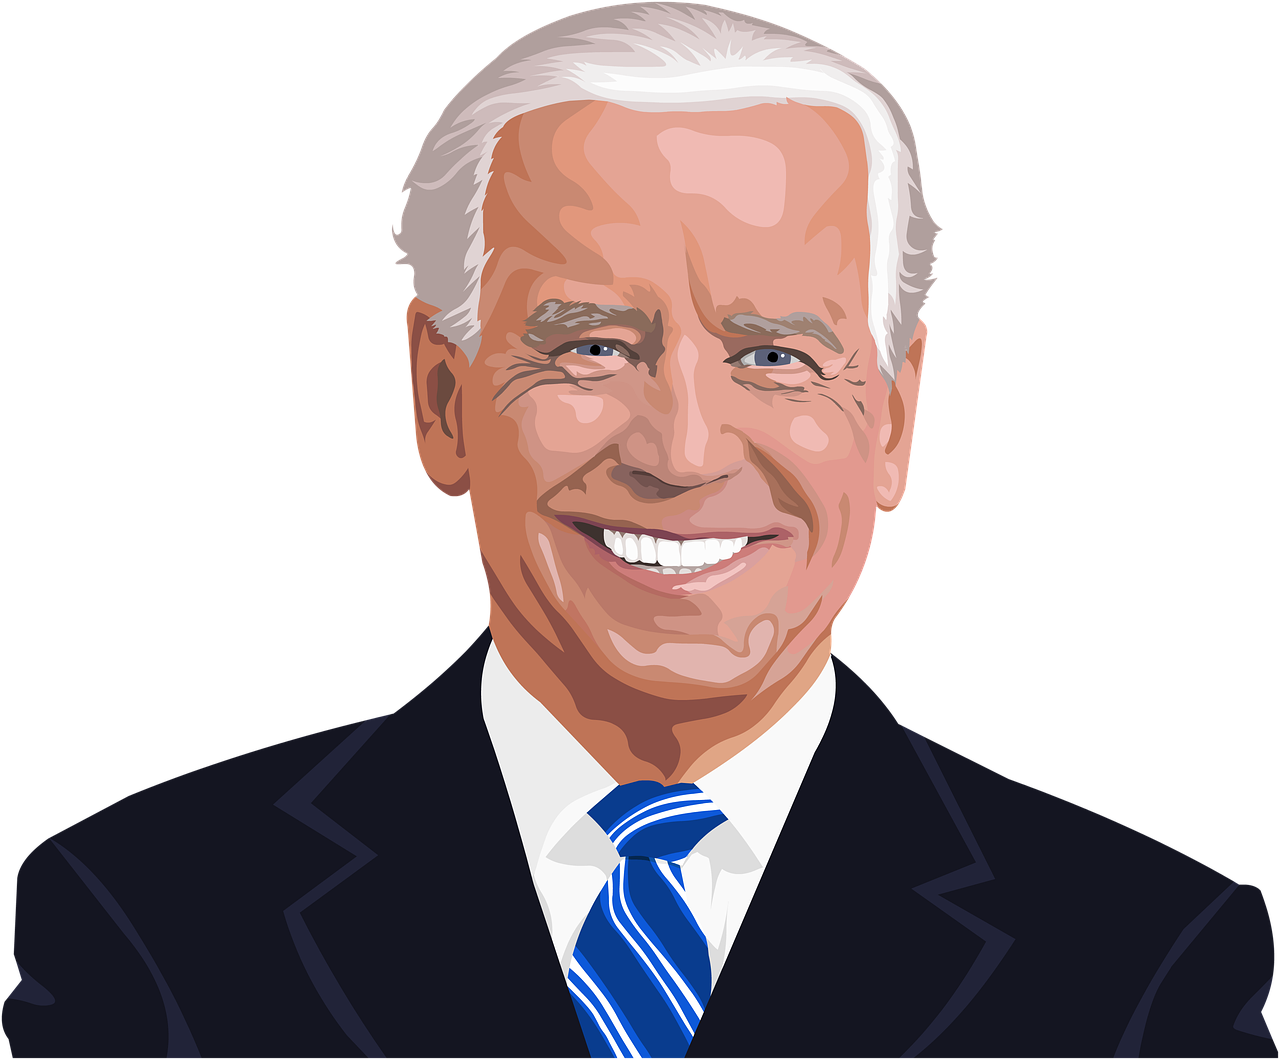 What the Biden Administration means for multifamily construction